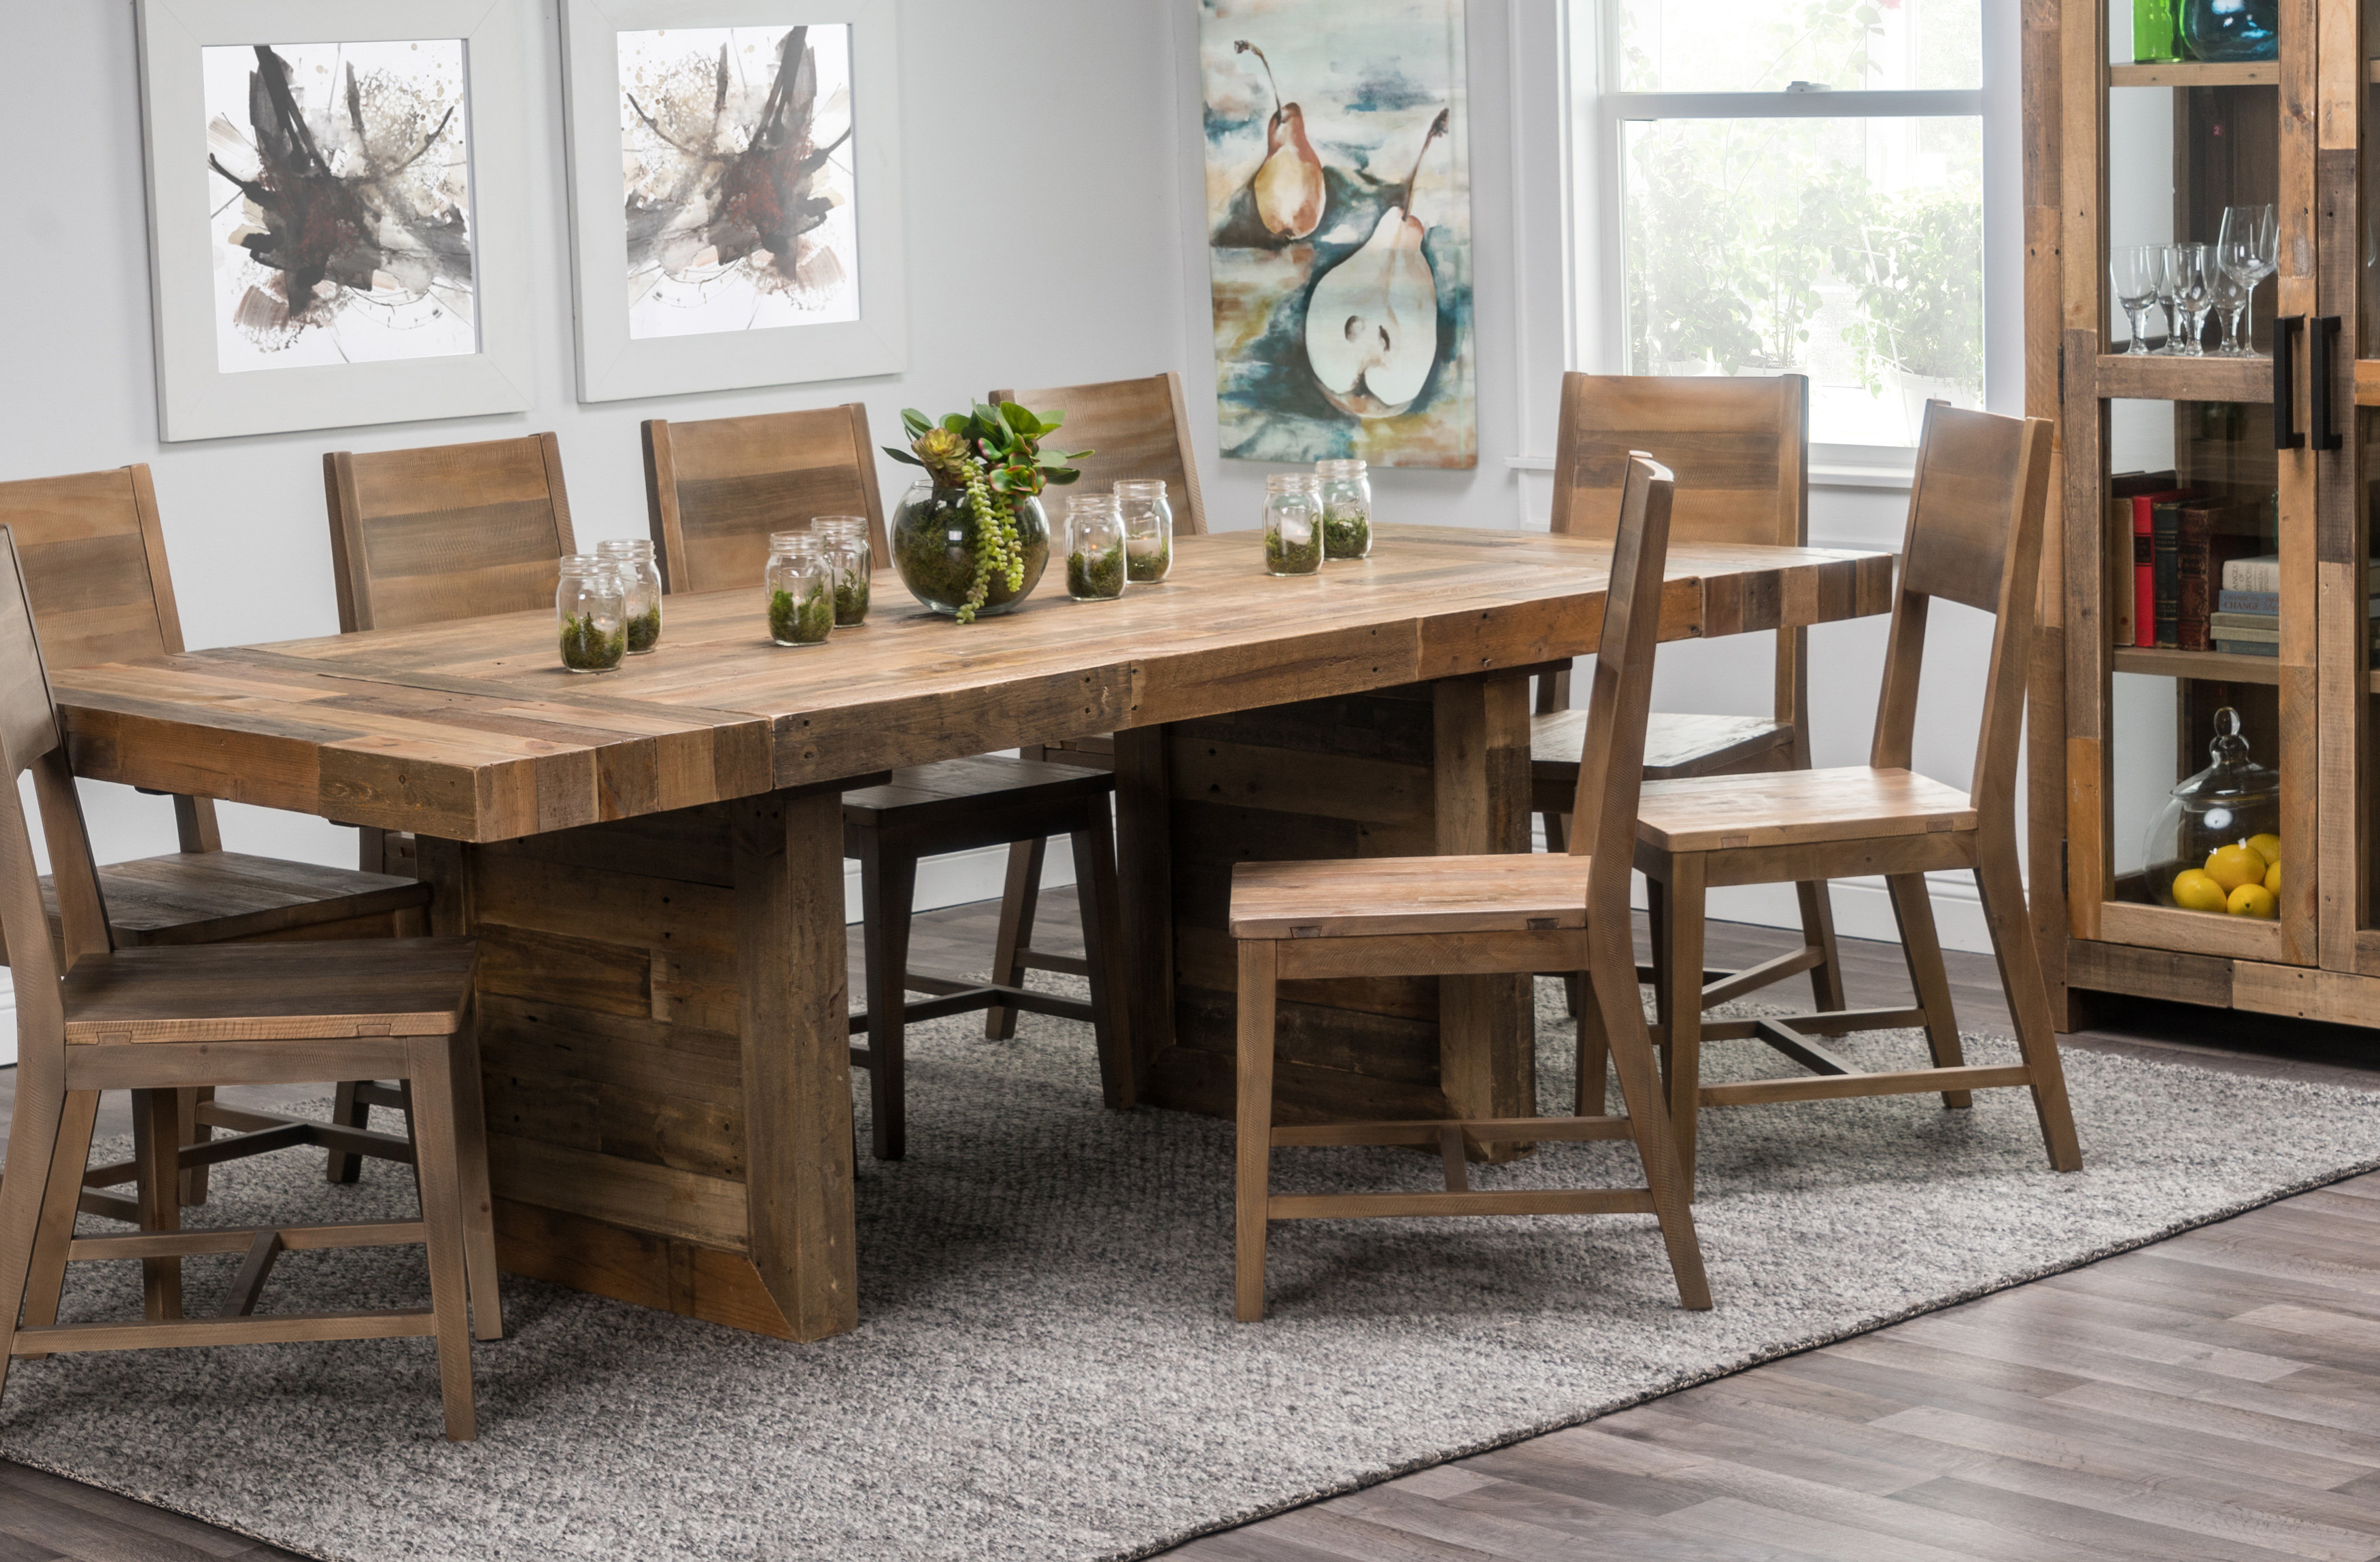 14 Seater Solid Wood Dining Room Table